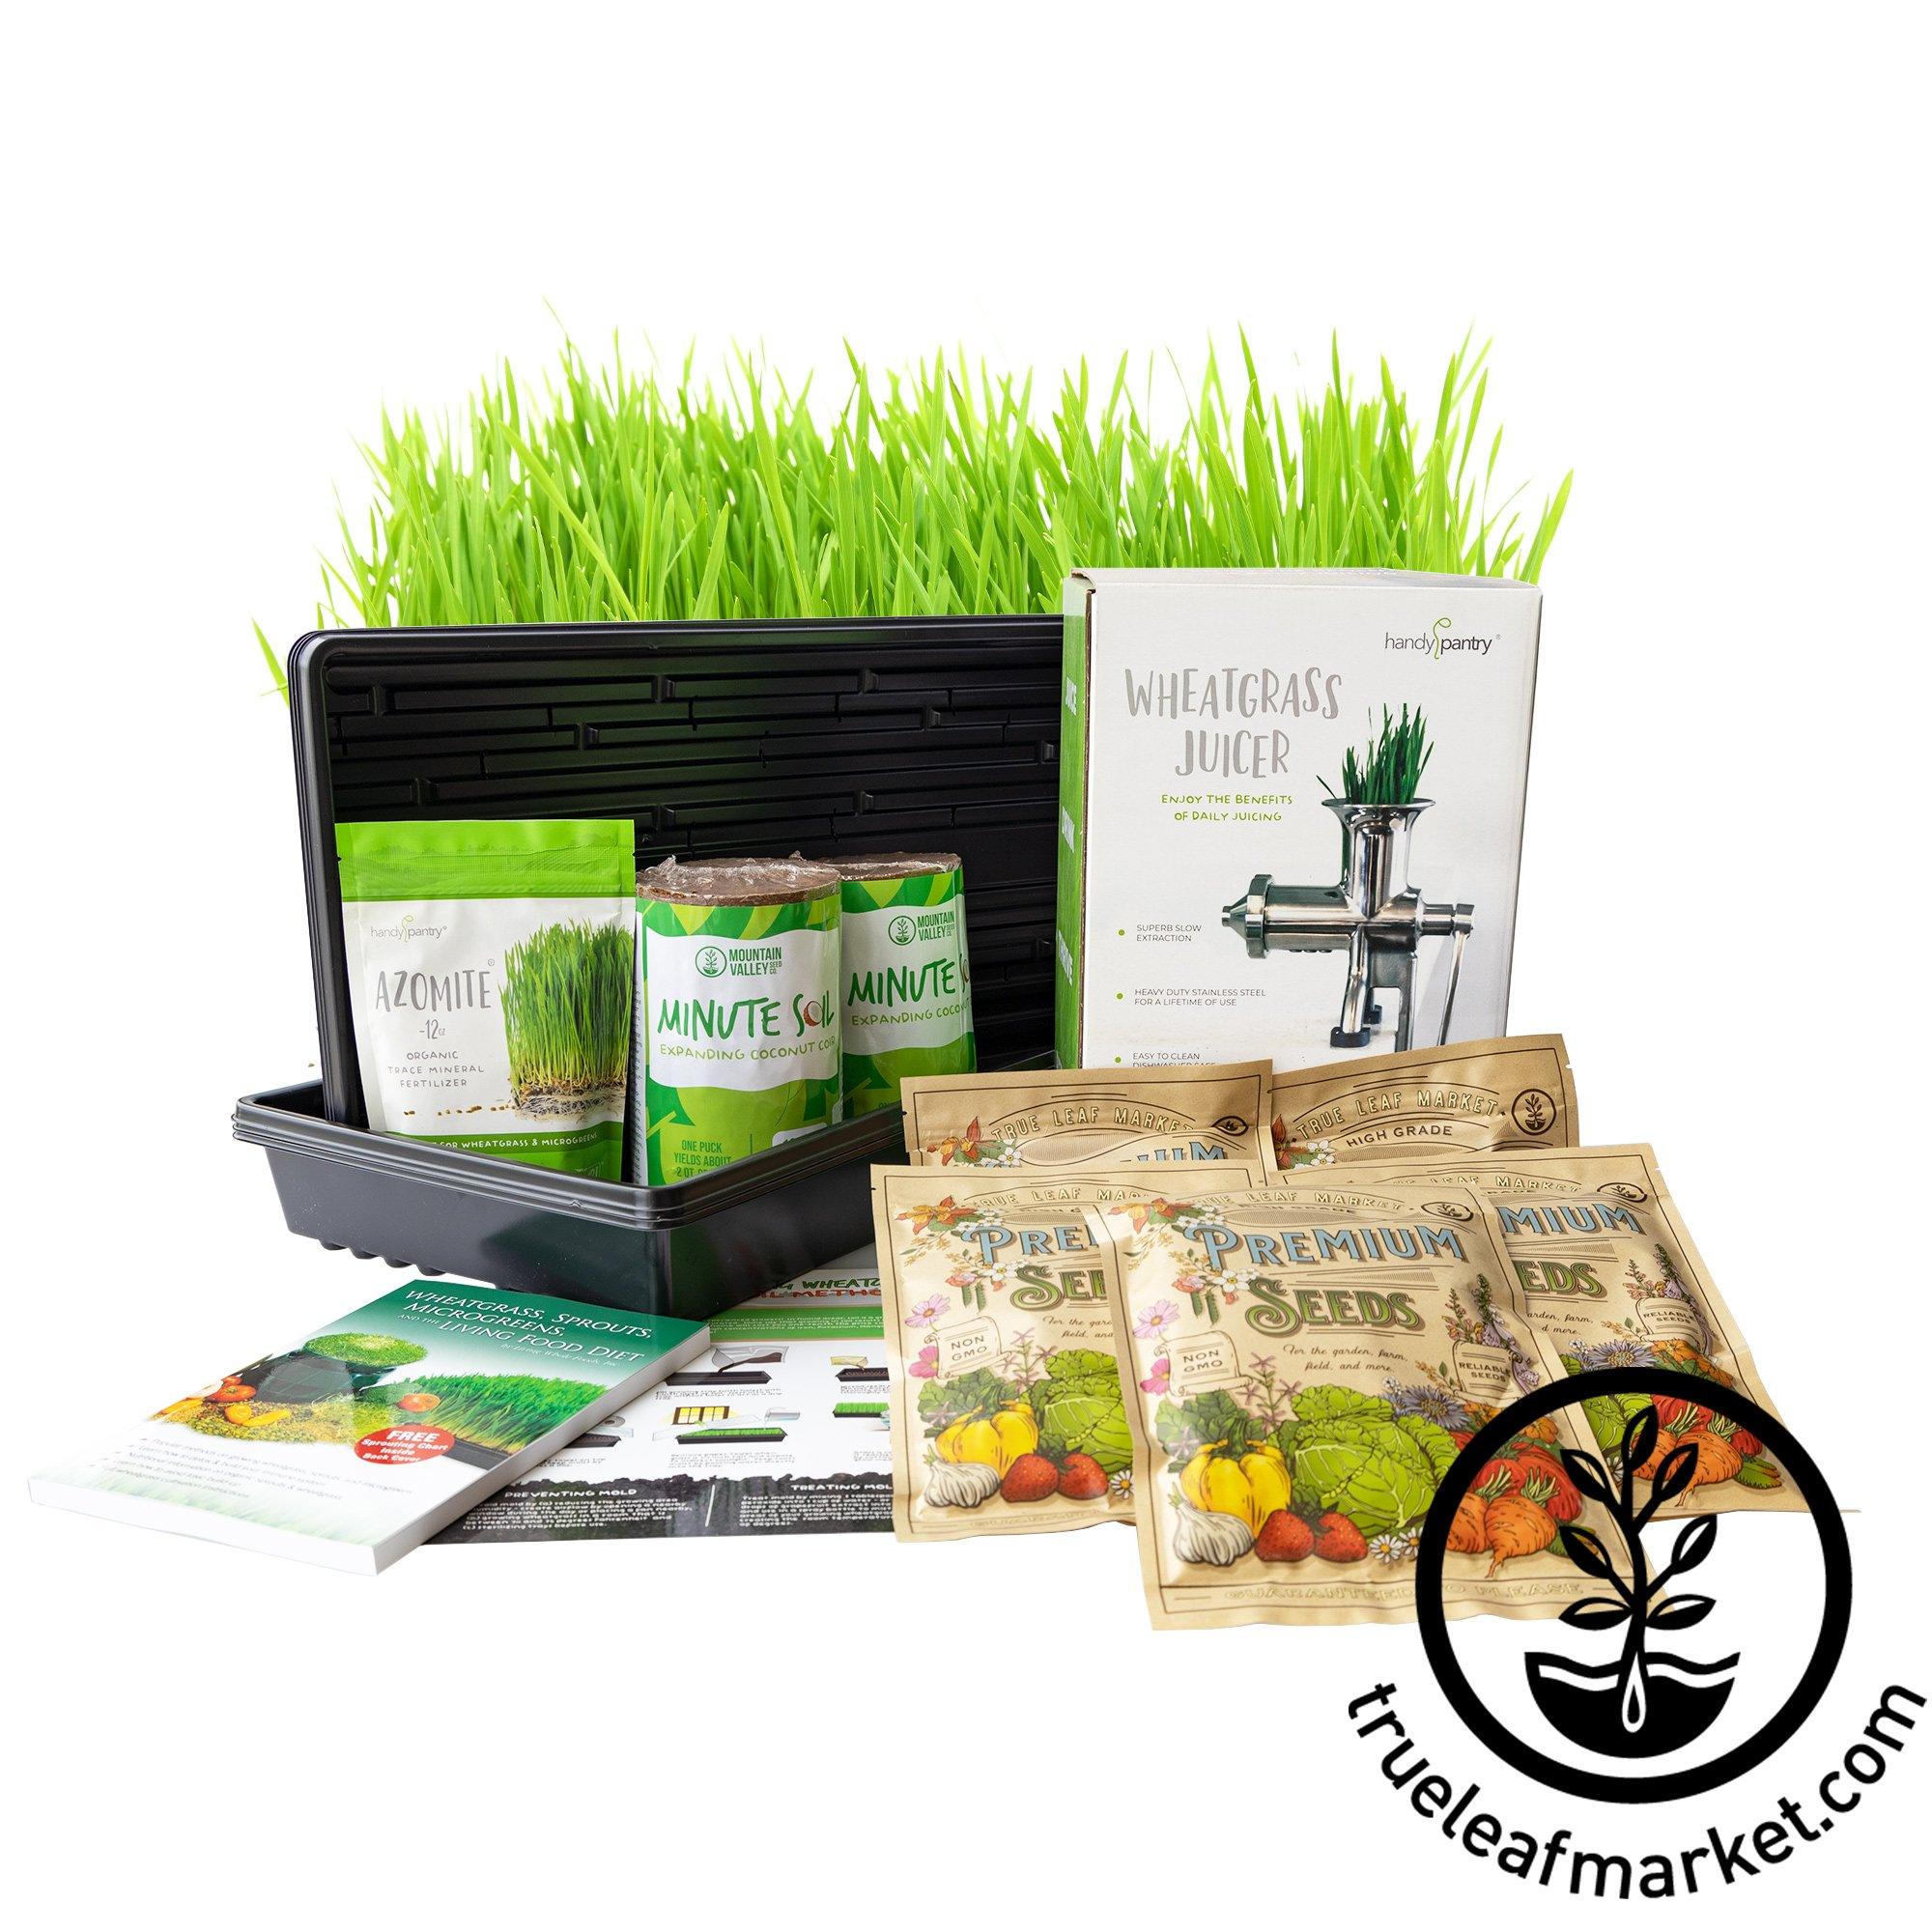 Hurricane Stainless Steel Manual Wheatgrass Juicer by Handy Pantry | True  Leaf Market Seed Company